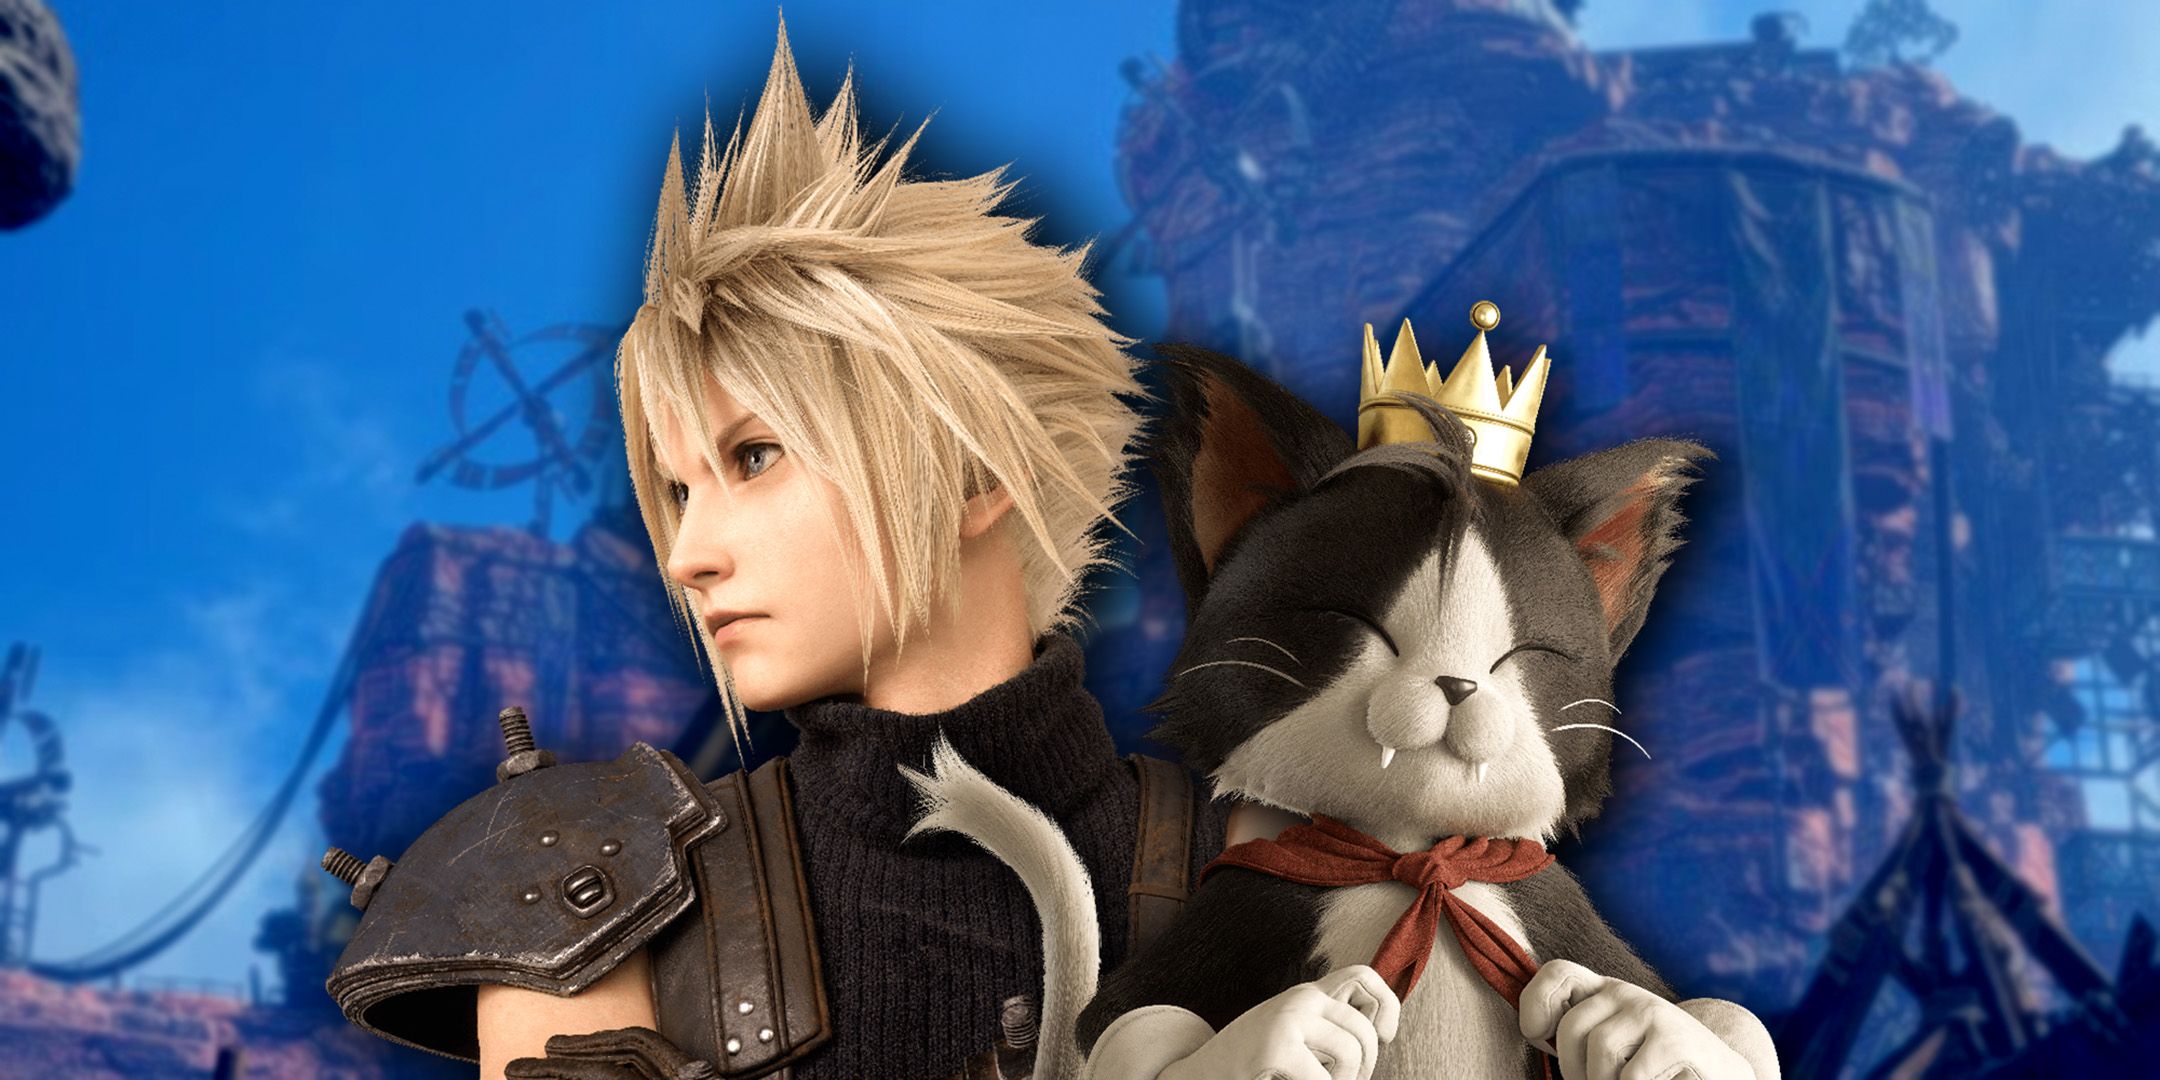 Cloud and Cait Sith standing side by side in Cosmo Canyon